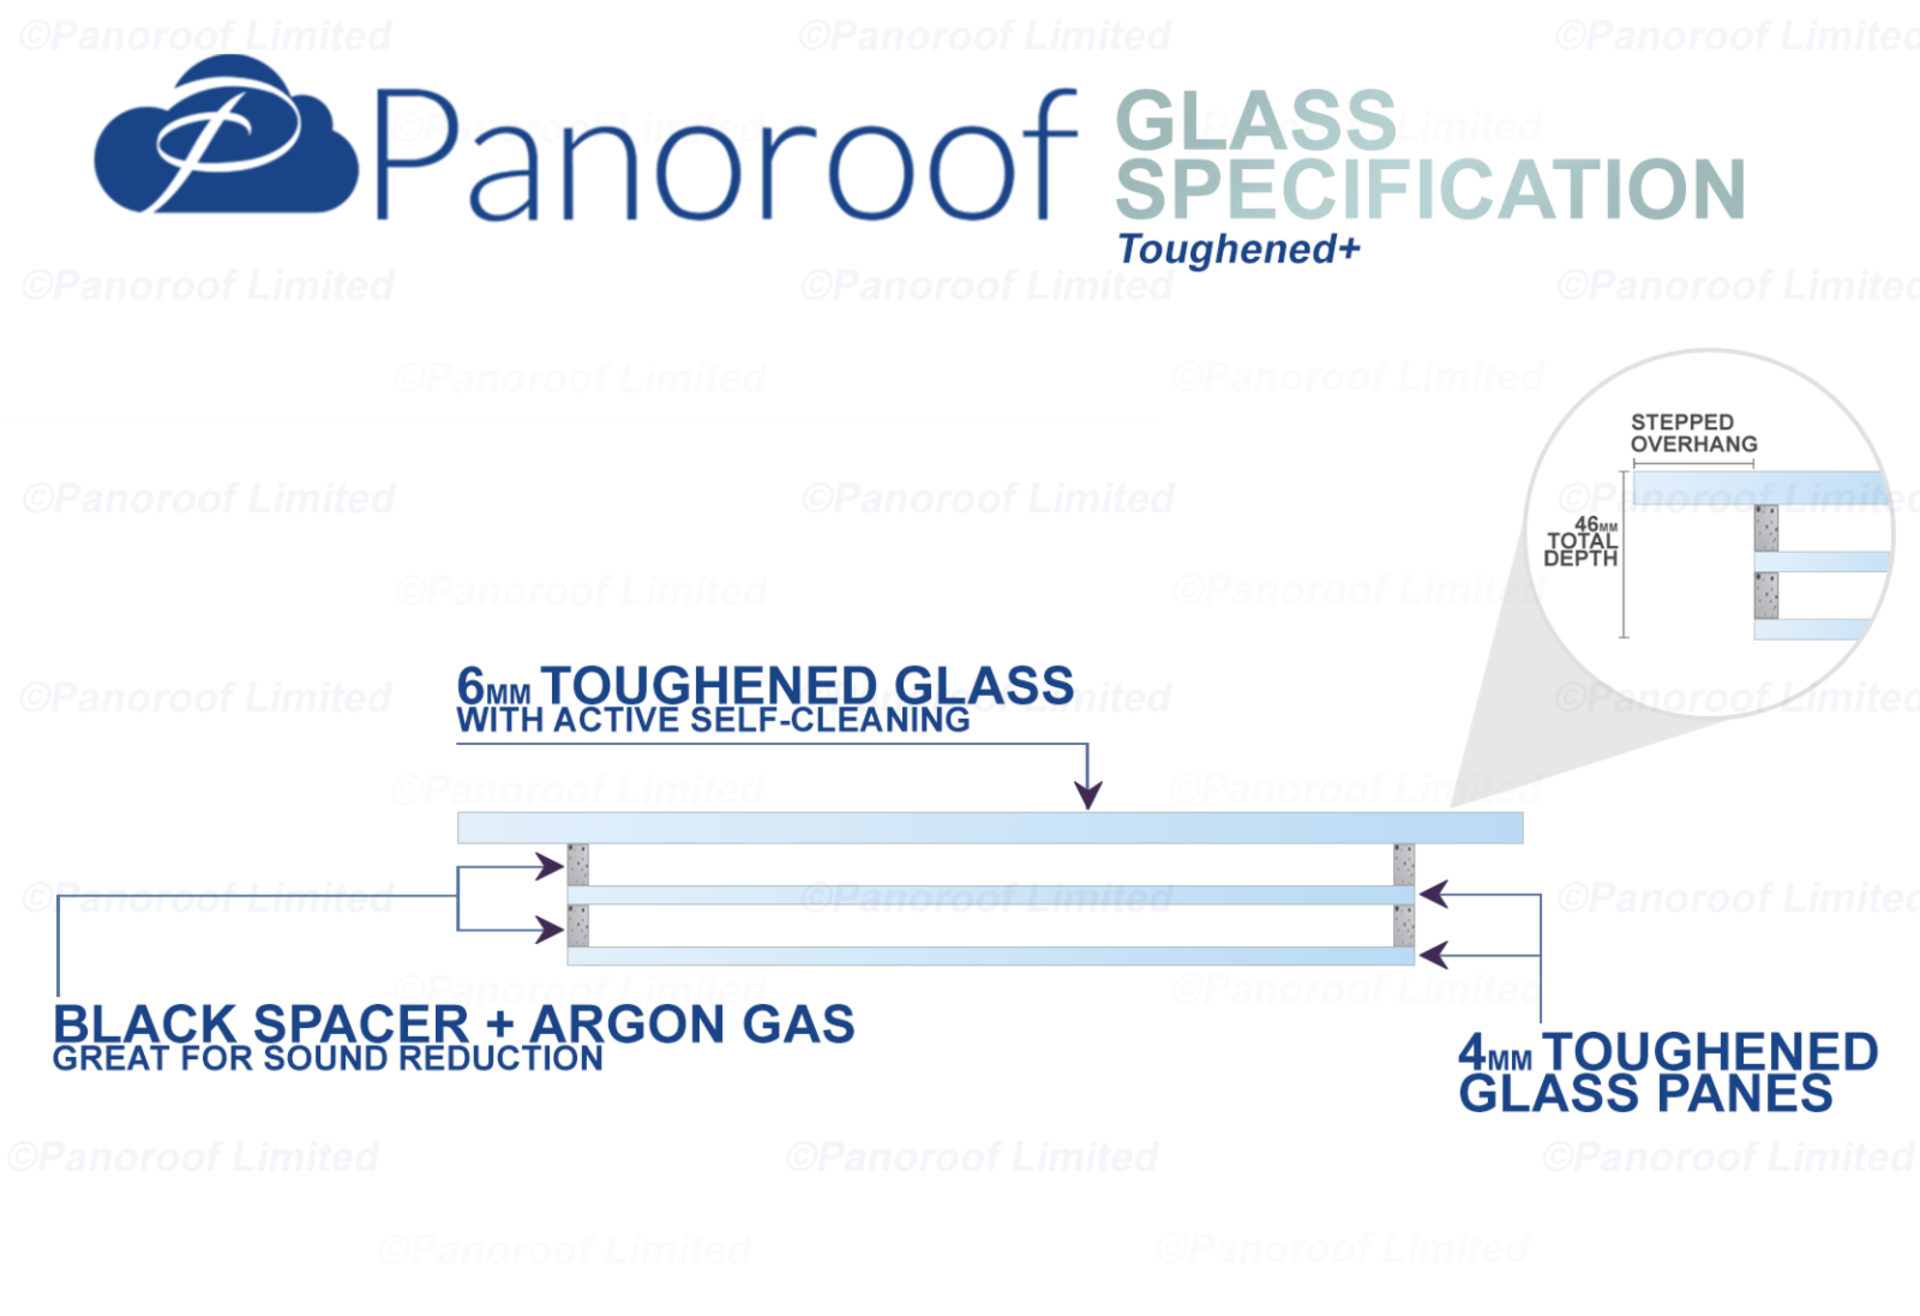 "Panoroof Triple Glazed Self Cleaning , 400x1500mm (inside Size Visable glass area) Seamless Glass - Image 5 of 6